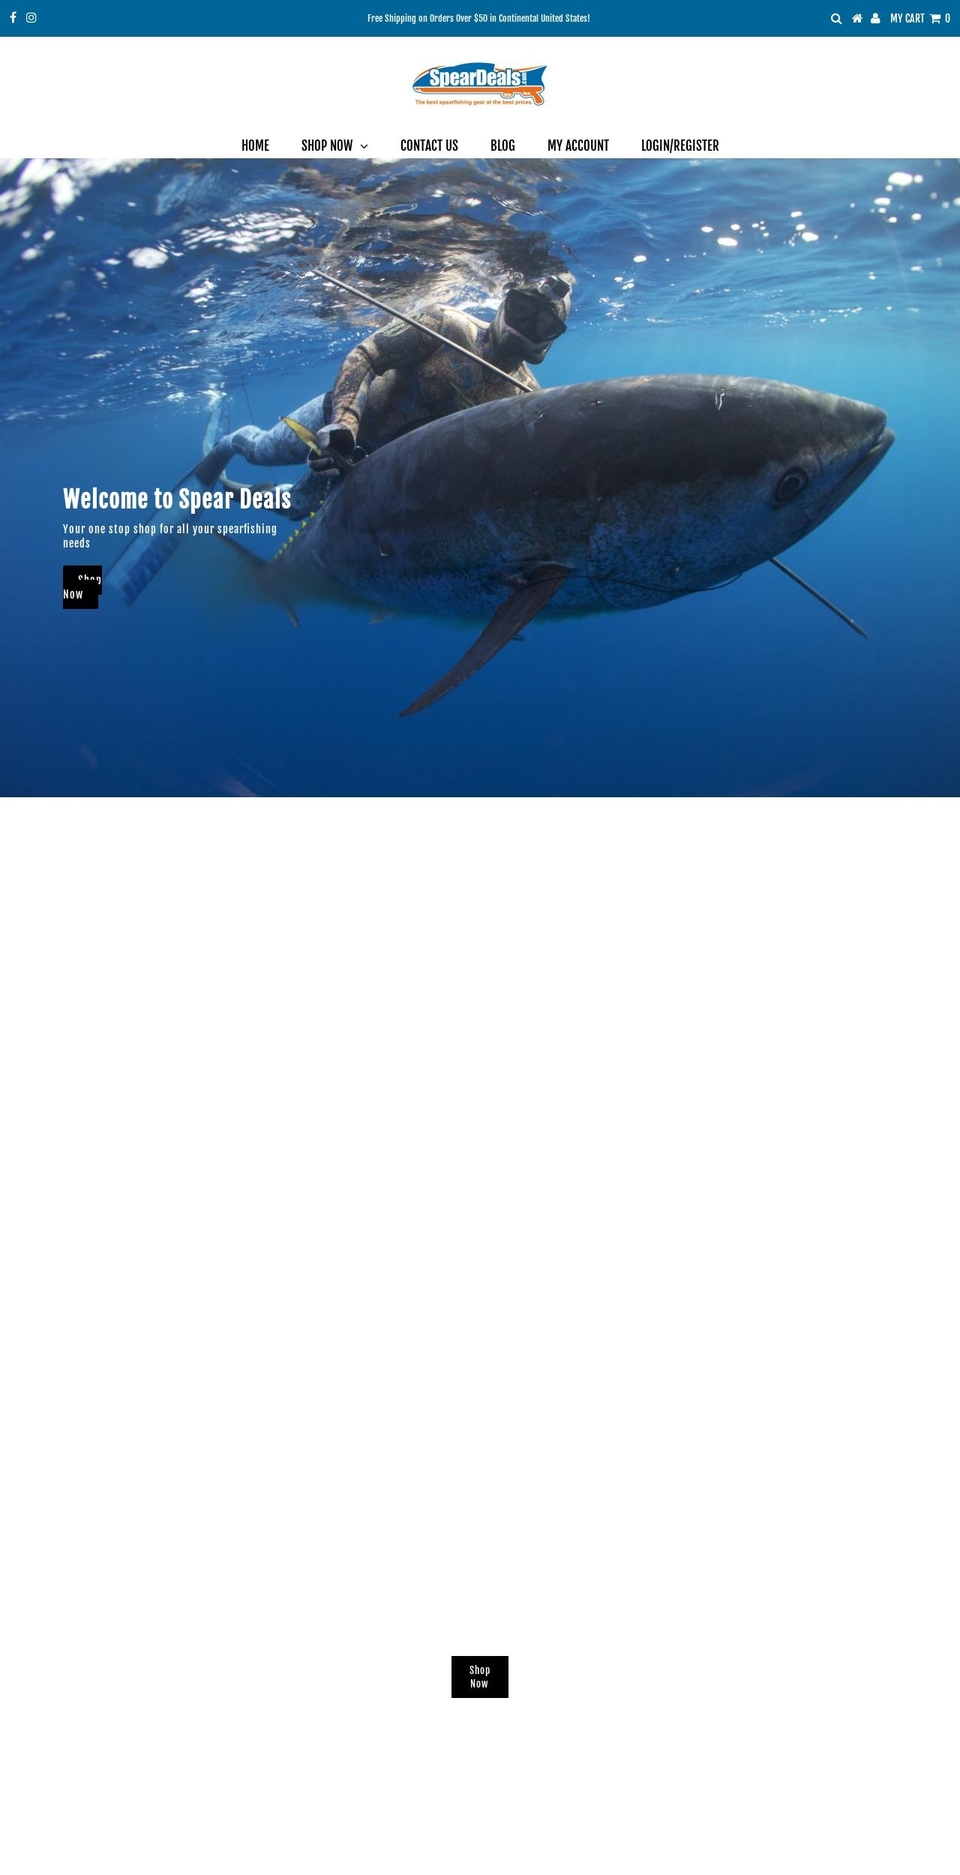 Current Shopify theme site example protectspearfishing.com